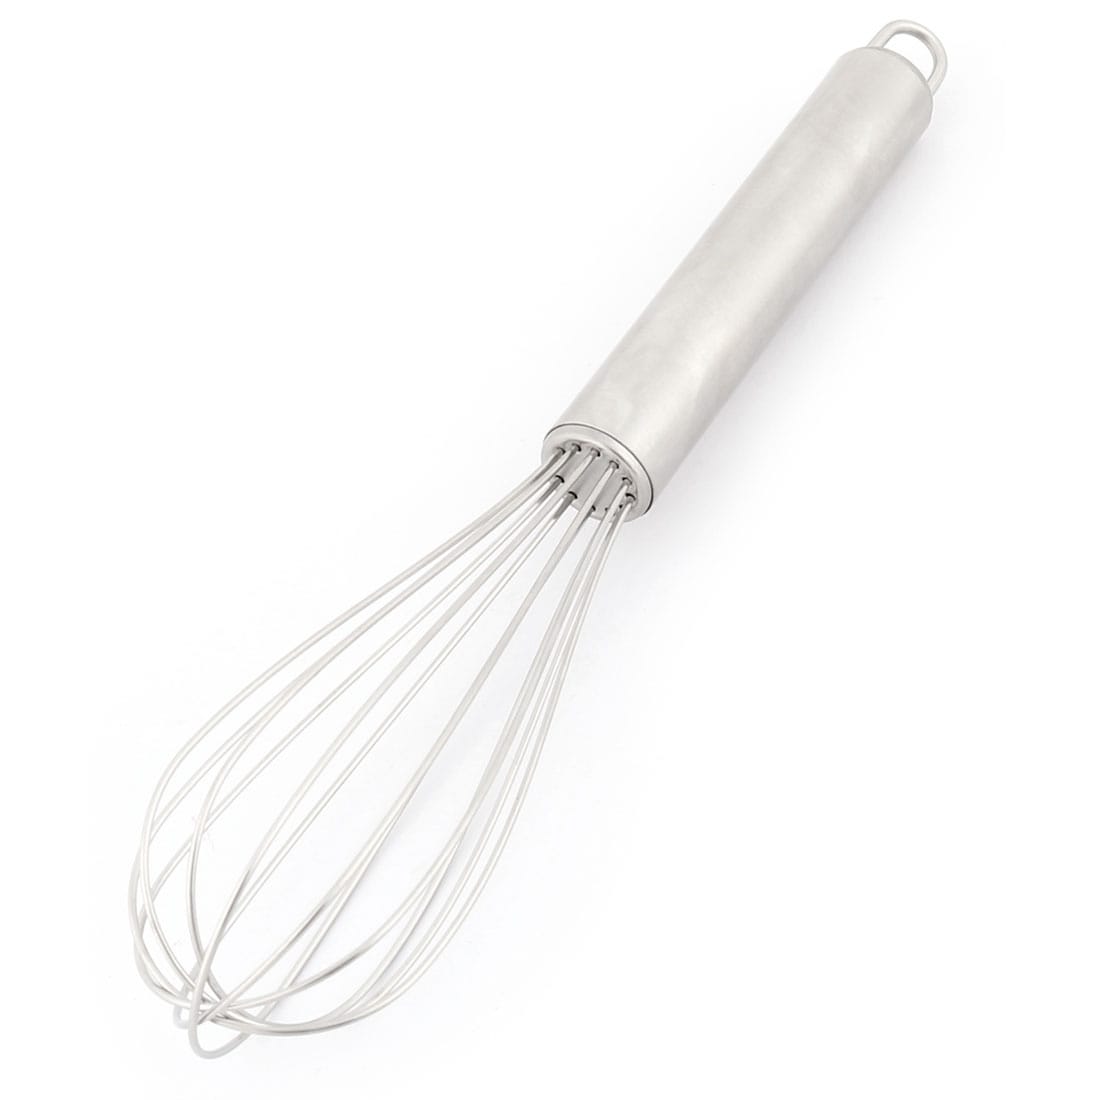 Antaijihua Rotary Whisk Whisk Whisk Hand Folding Mixer, Great for Non-Stick  Cookware, Milk and Whisk Mixers, Home Baking Kitchen Gadgets (Purple)